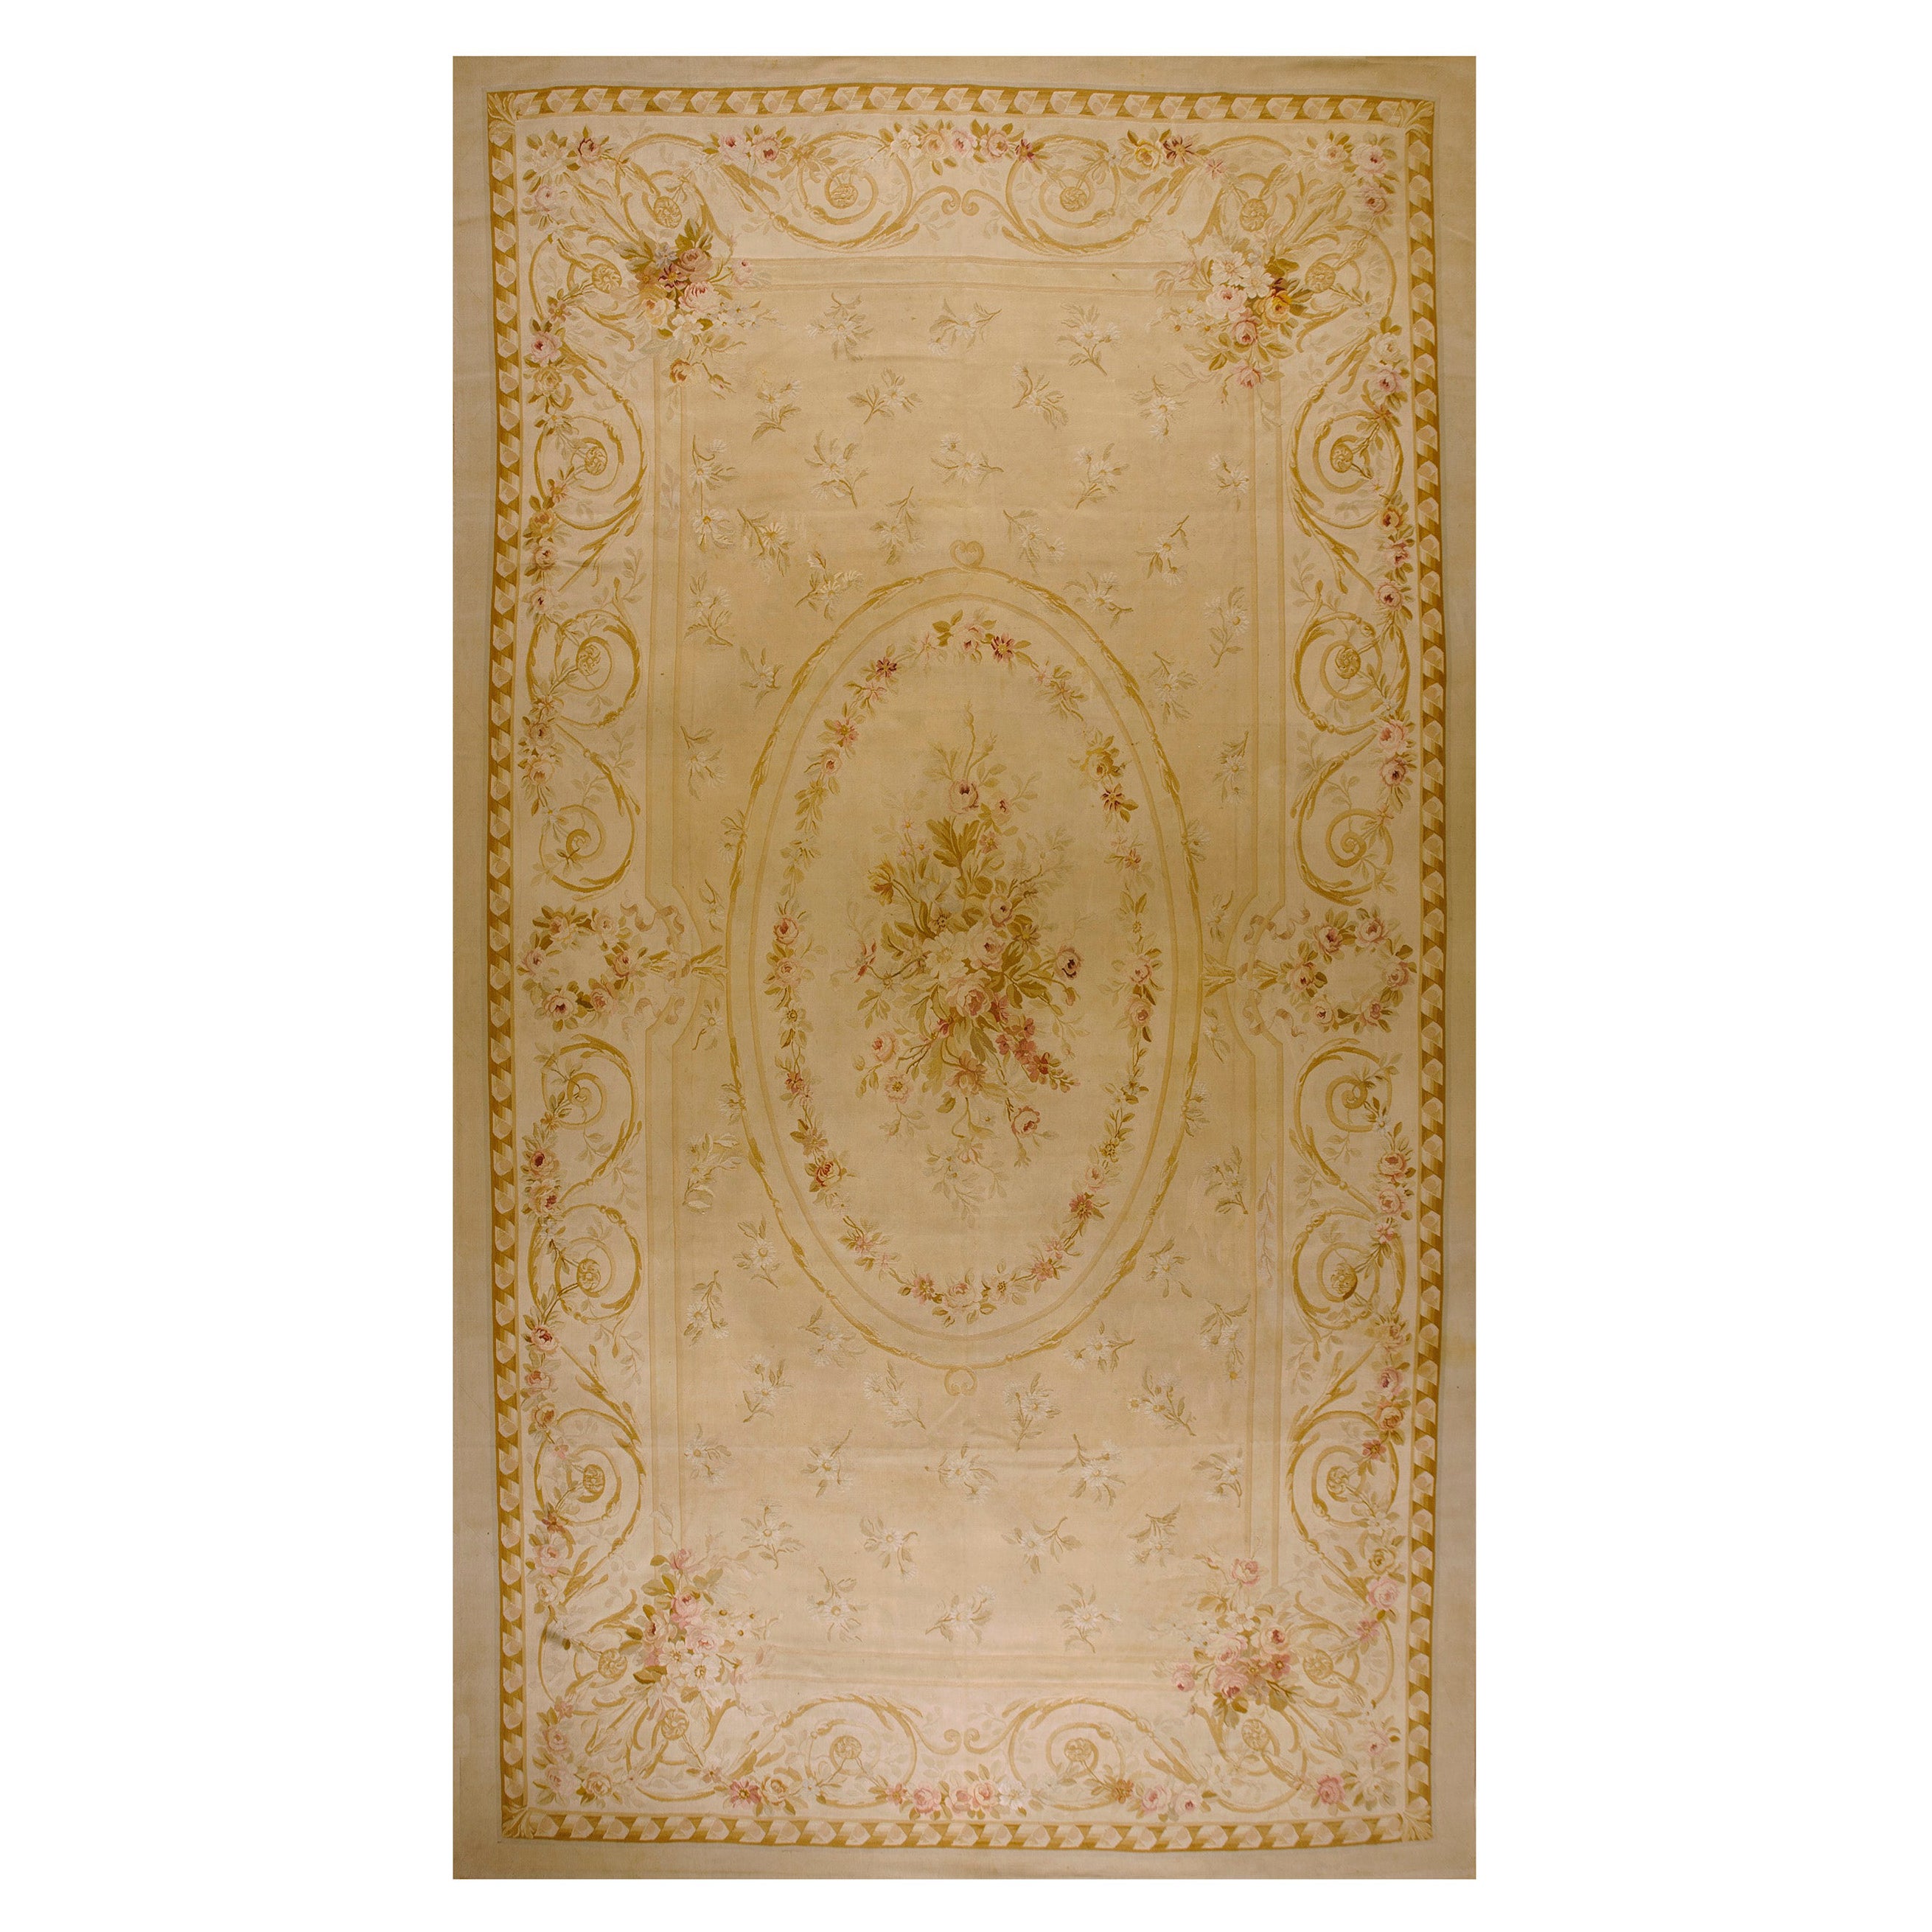 Late 19th Century French Aubusson Carpet ( 10'2" x 17'3" - 310 x 556 )